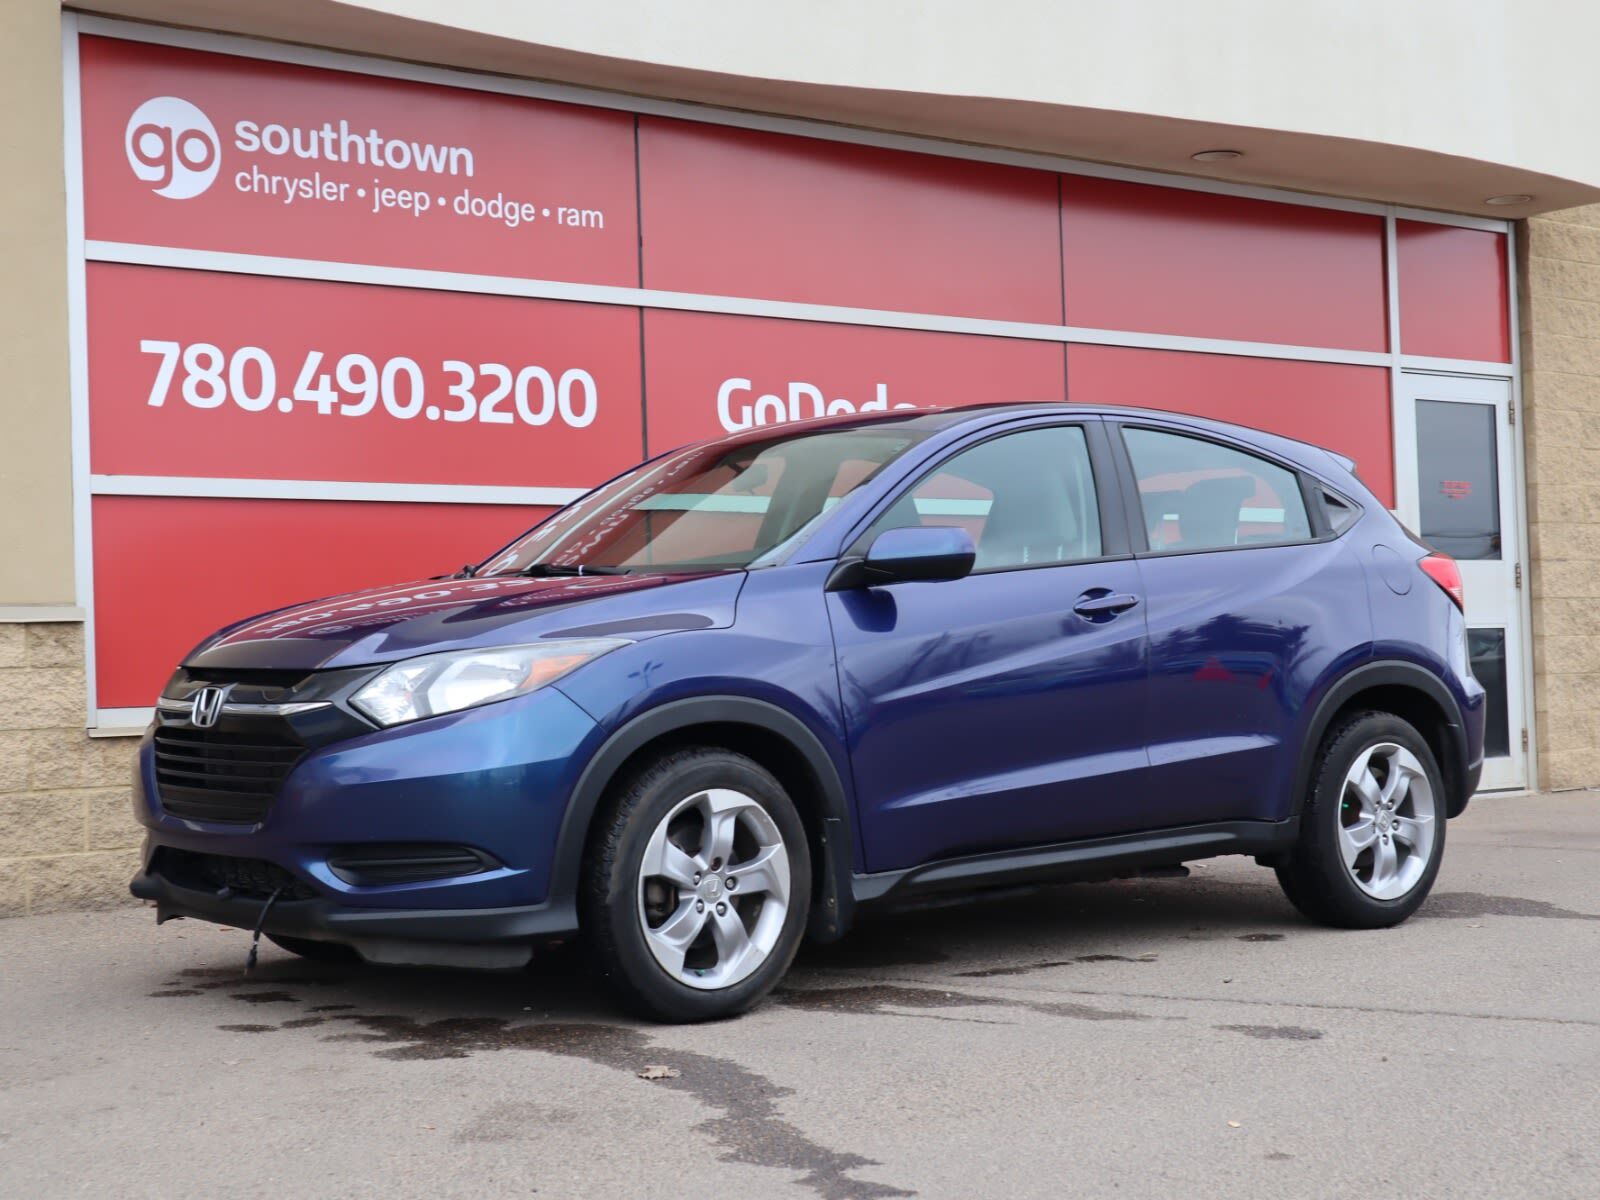 2017 Honda HR-V LX IN BLUE EQUIPPED WITH A FUEL EFFICIENT 141HP 1.